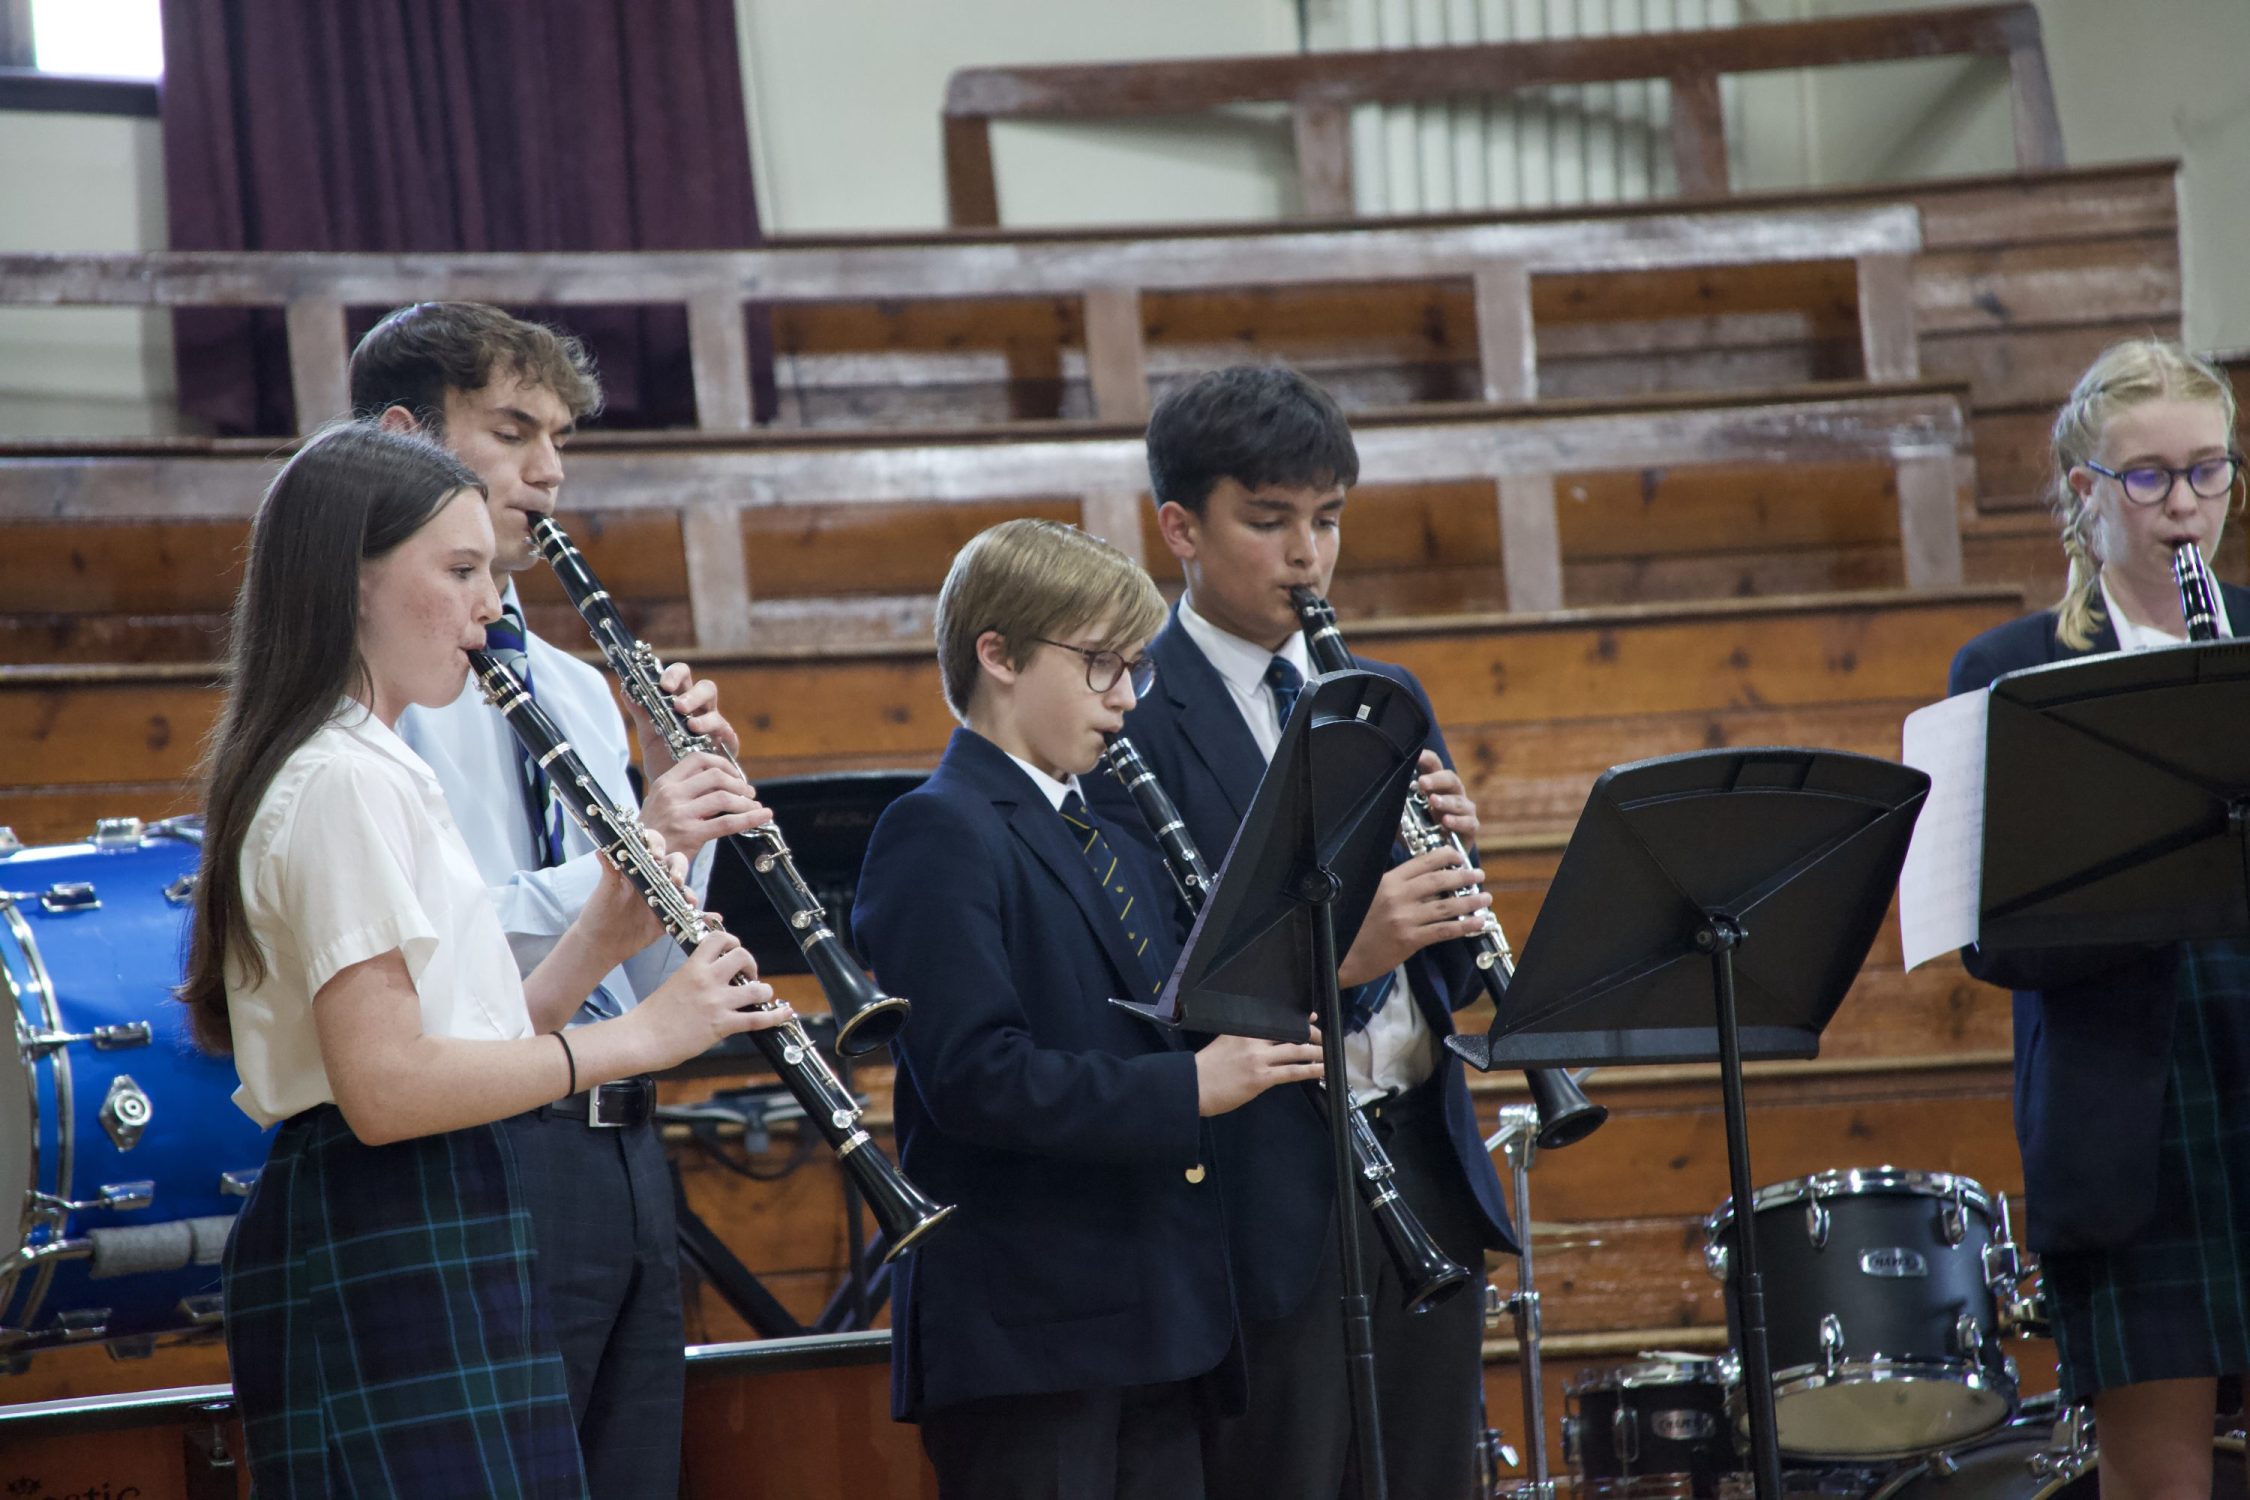 RGS Talent on show at The Creative Arts Festival - Musical treats